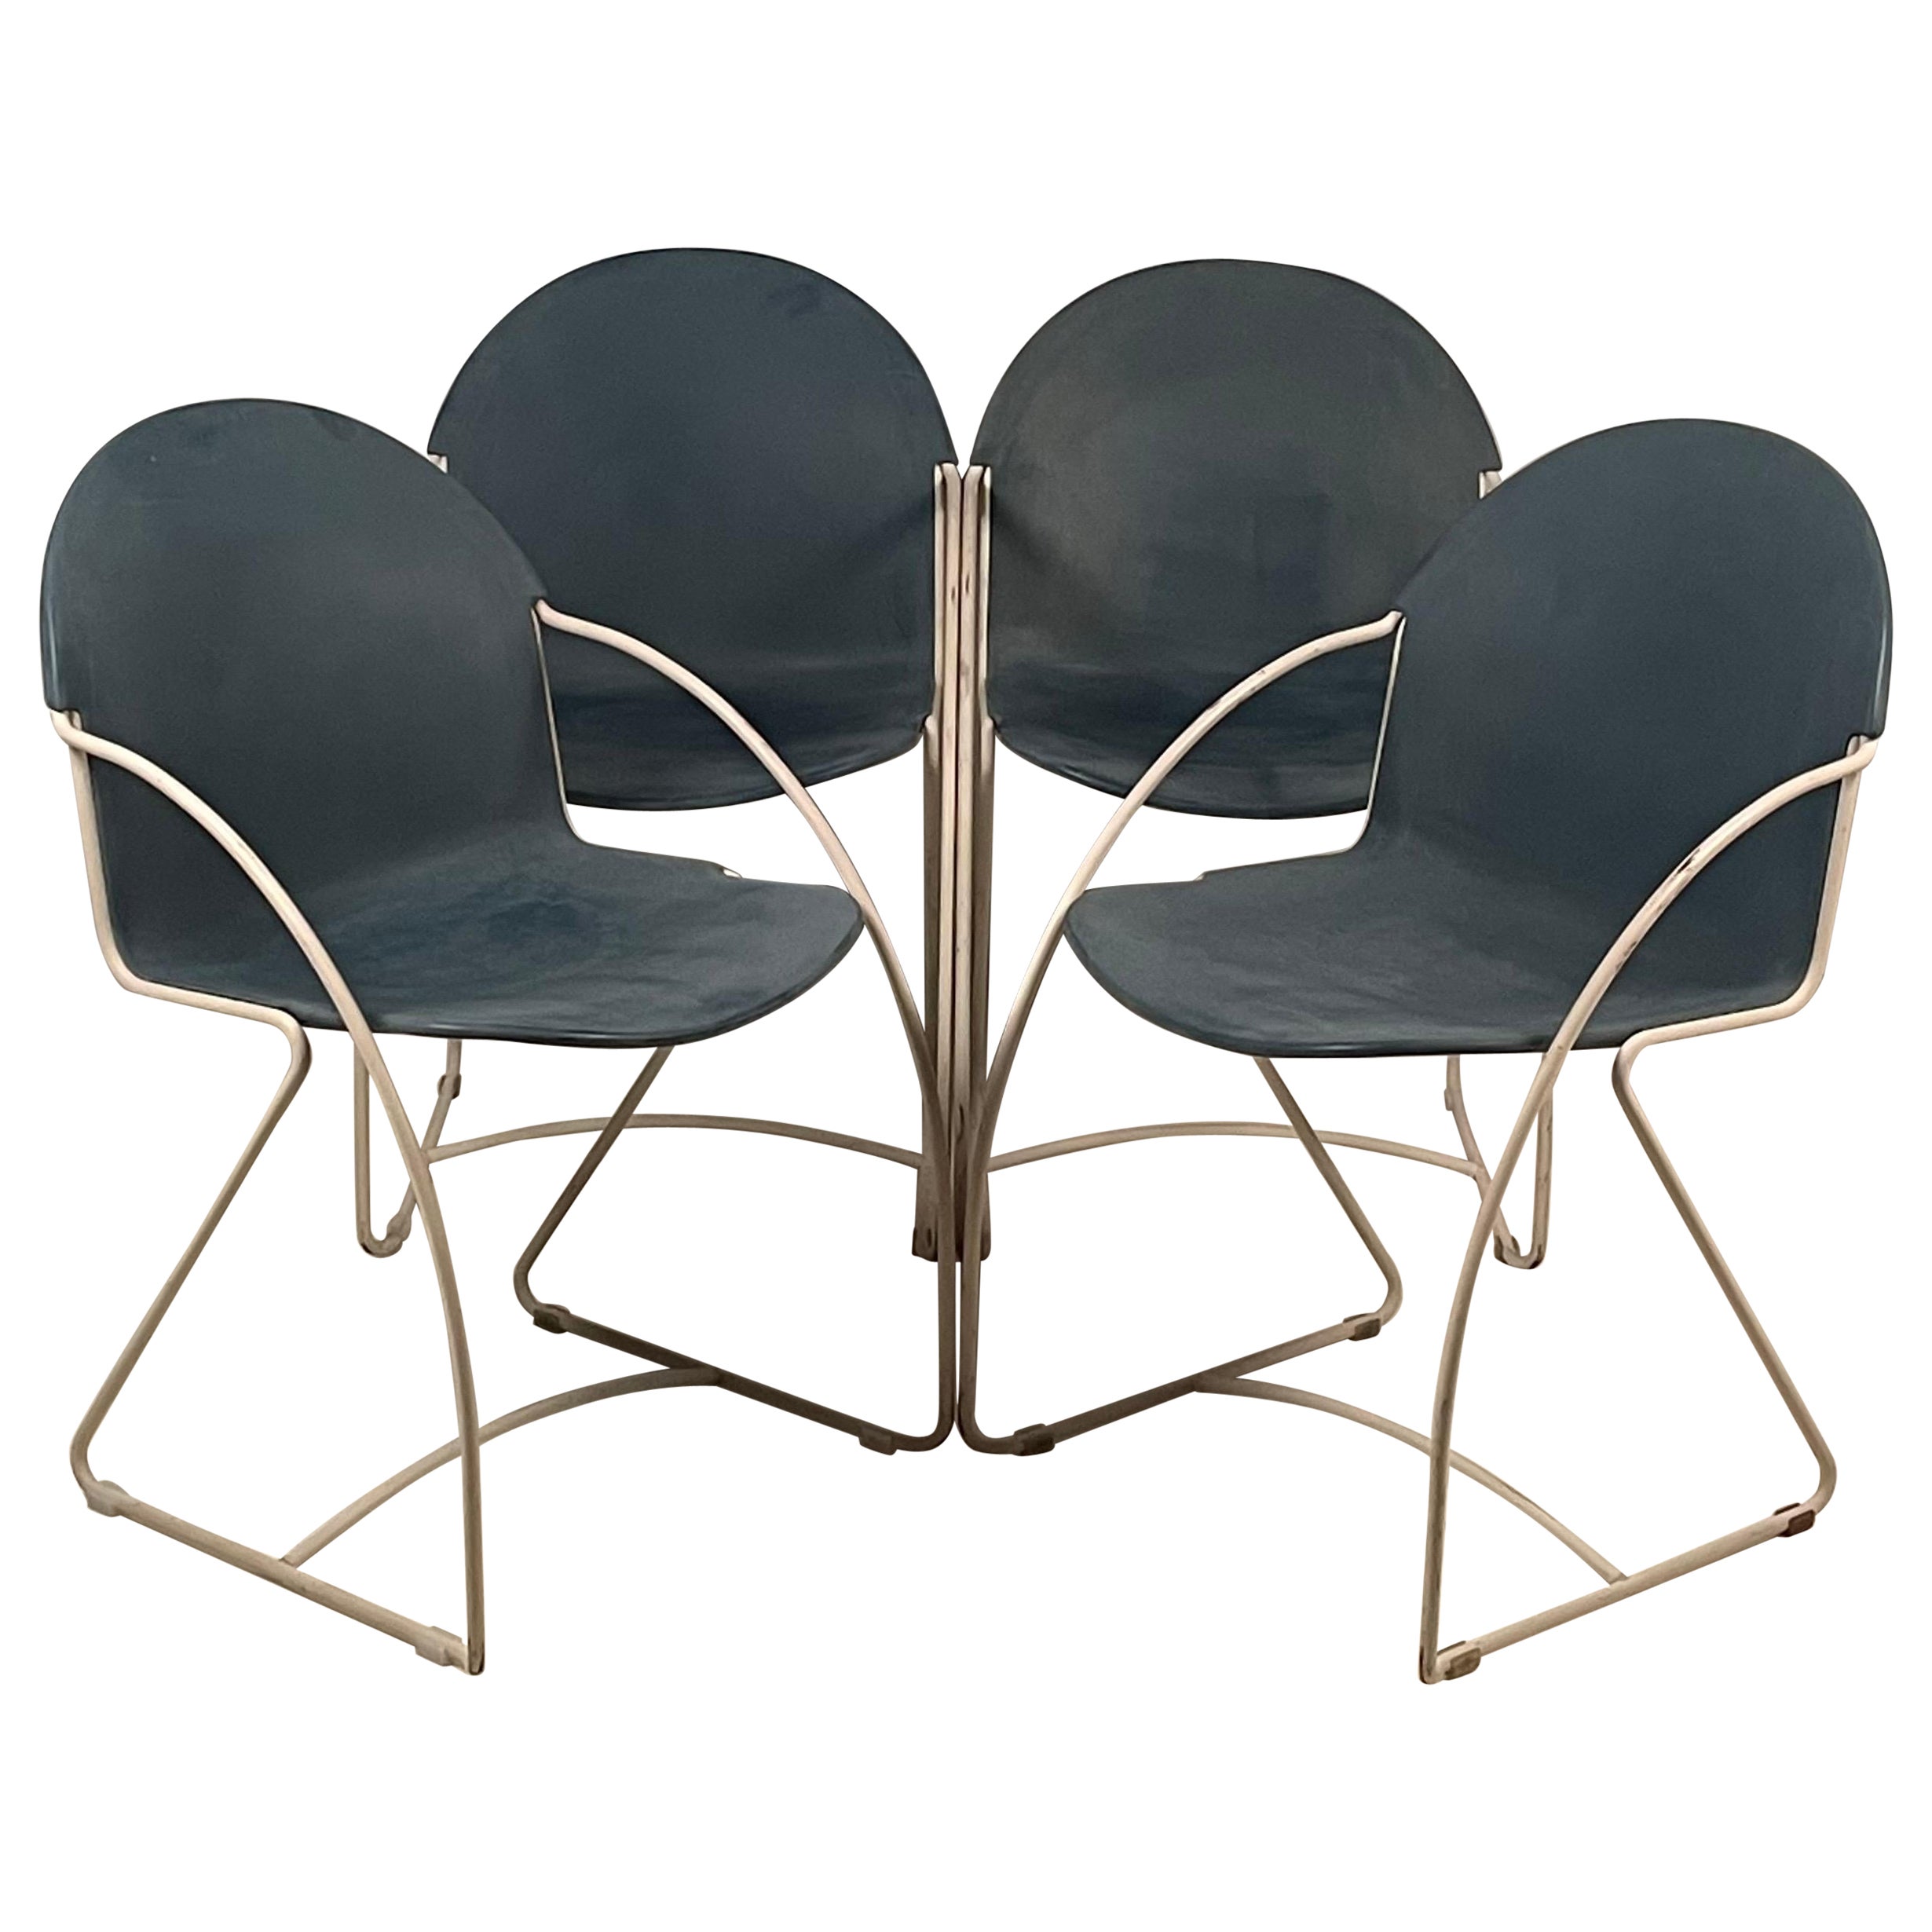 Set of 4 Enameled Indoor / Outdoor Post-Modern Stacking Shell Chairs